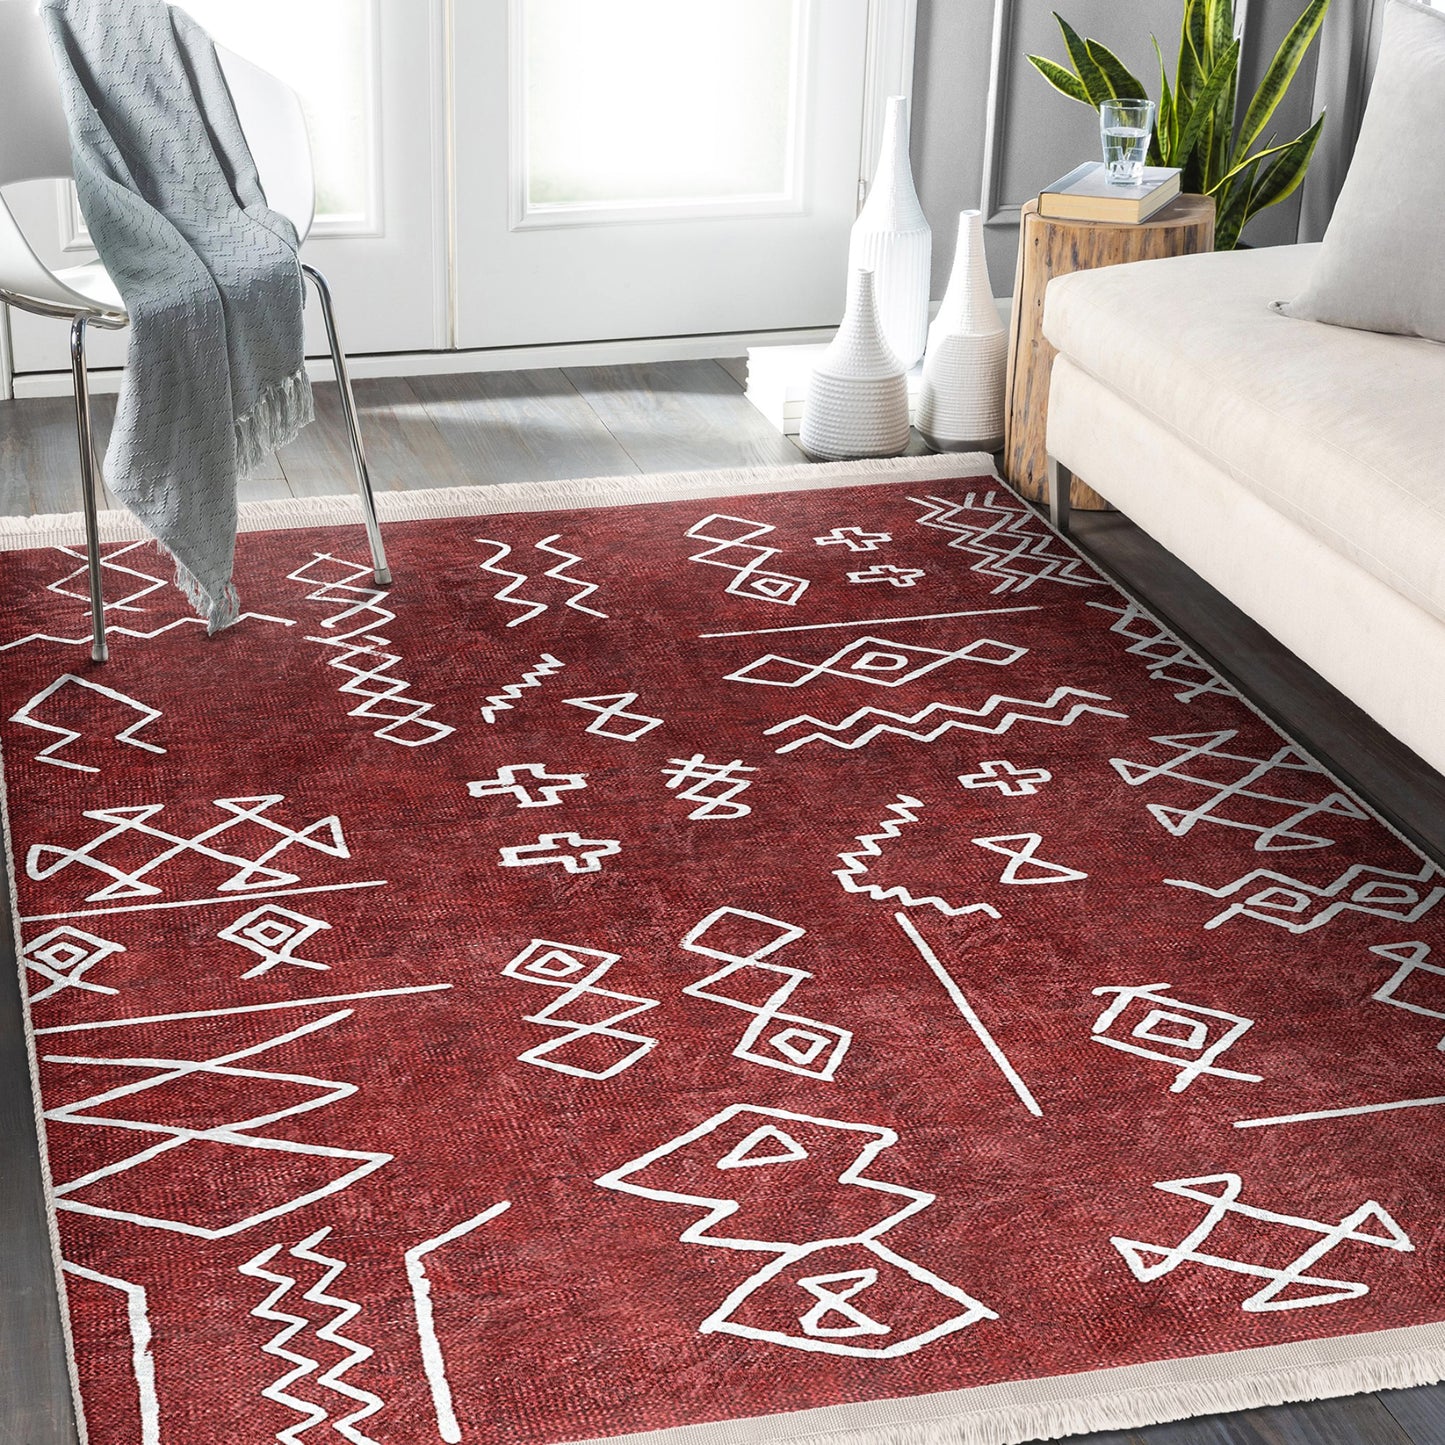 Functional and Stylish Living Room Rug with Timeless Southwestern Craftsmanship